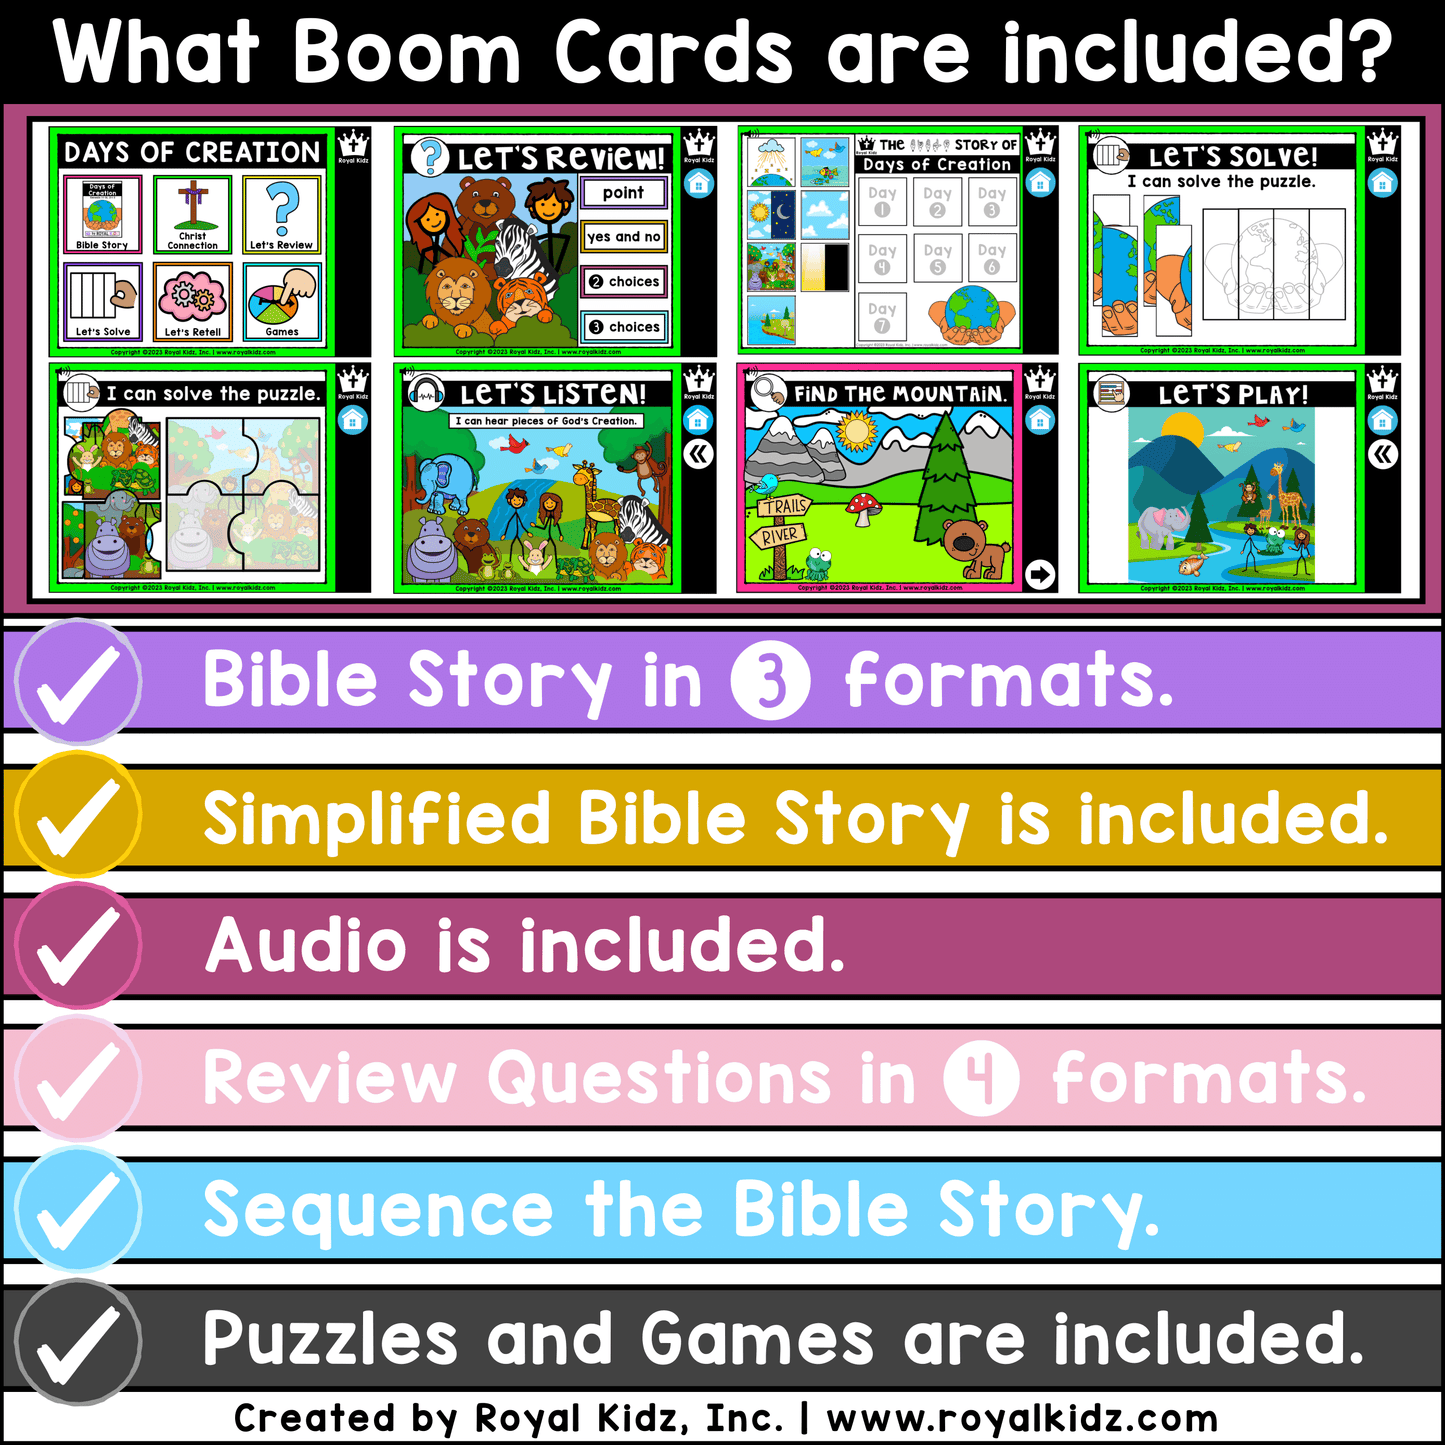 Days of Creation Adapted Book WITH Symbol Supports + Bible Boom Cards™